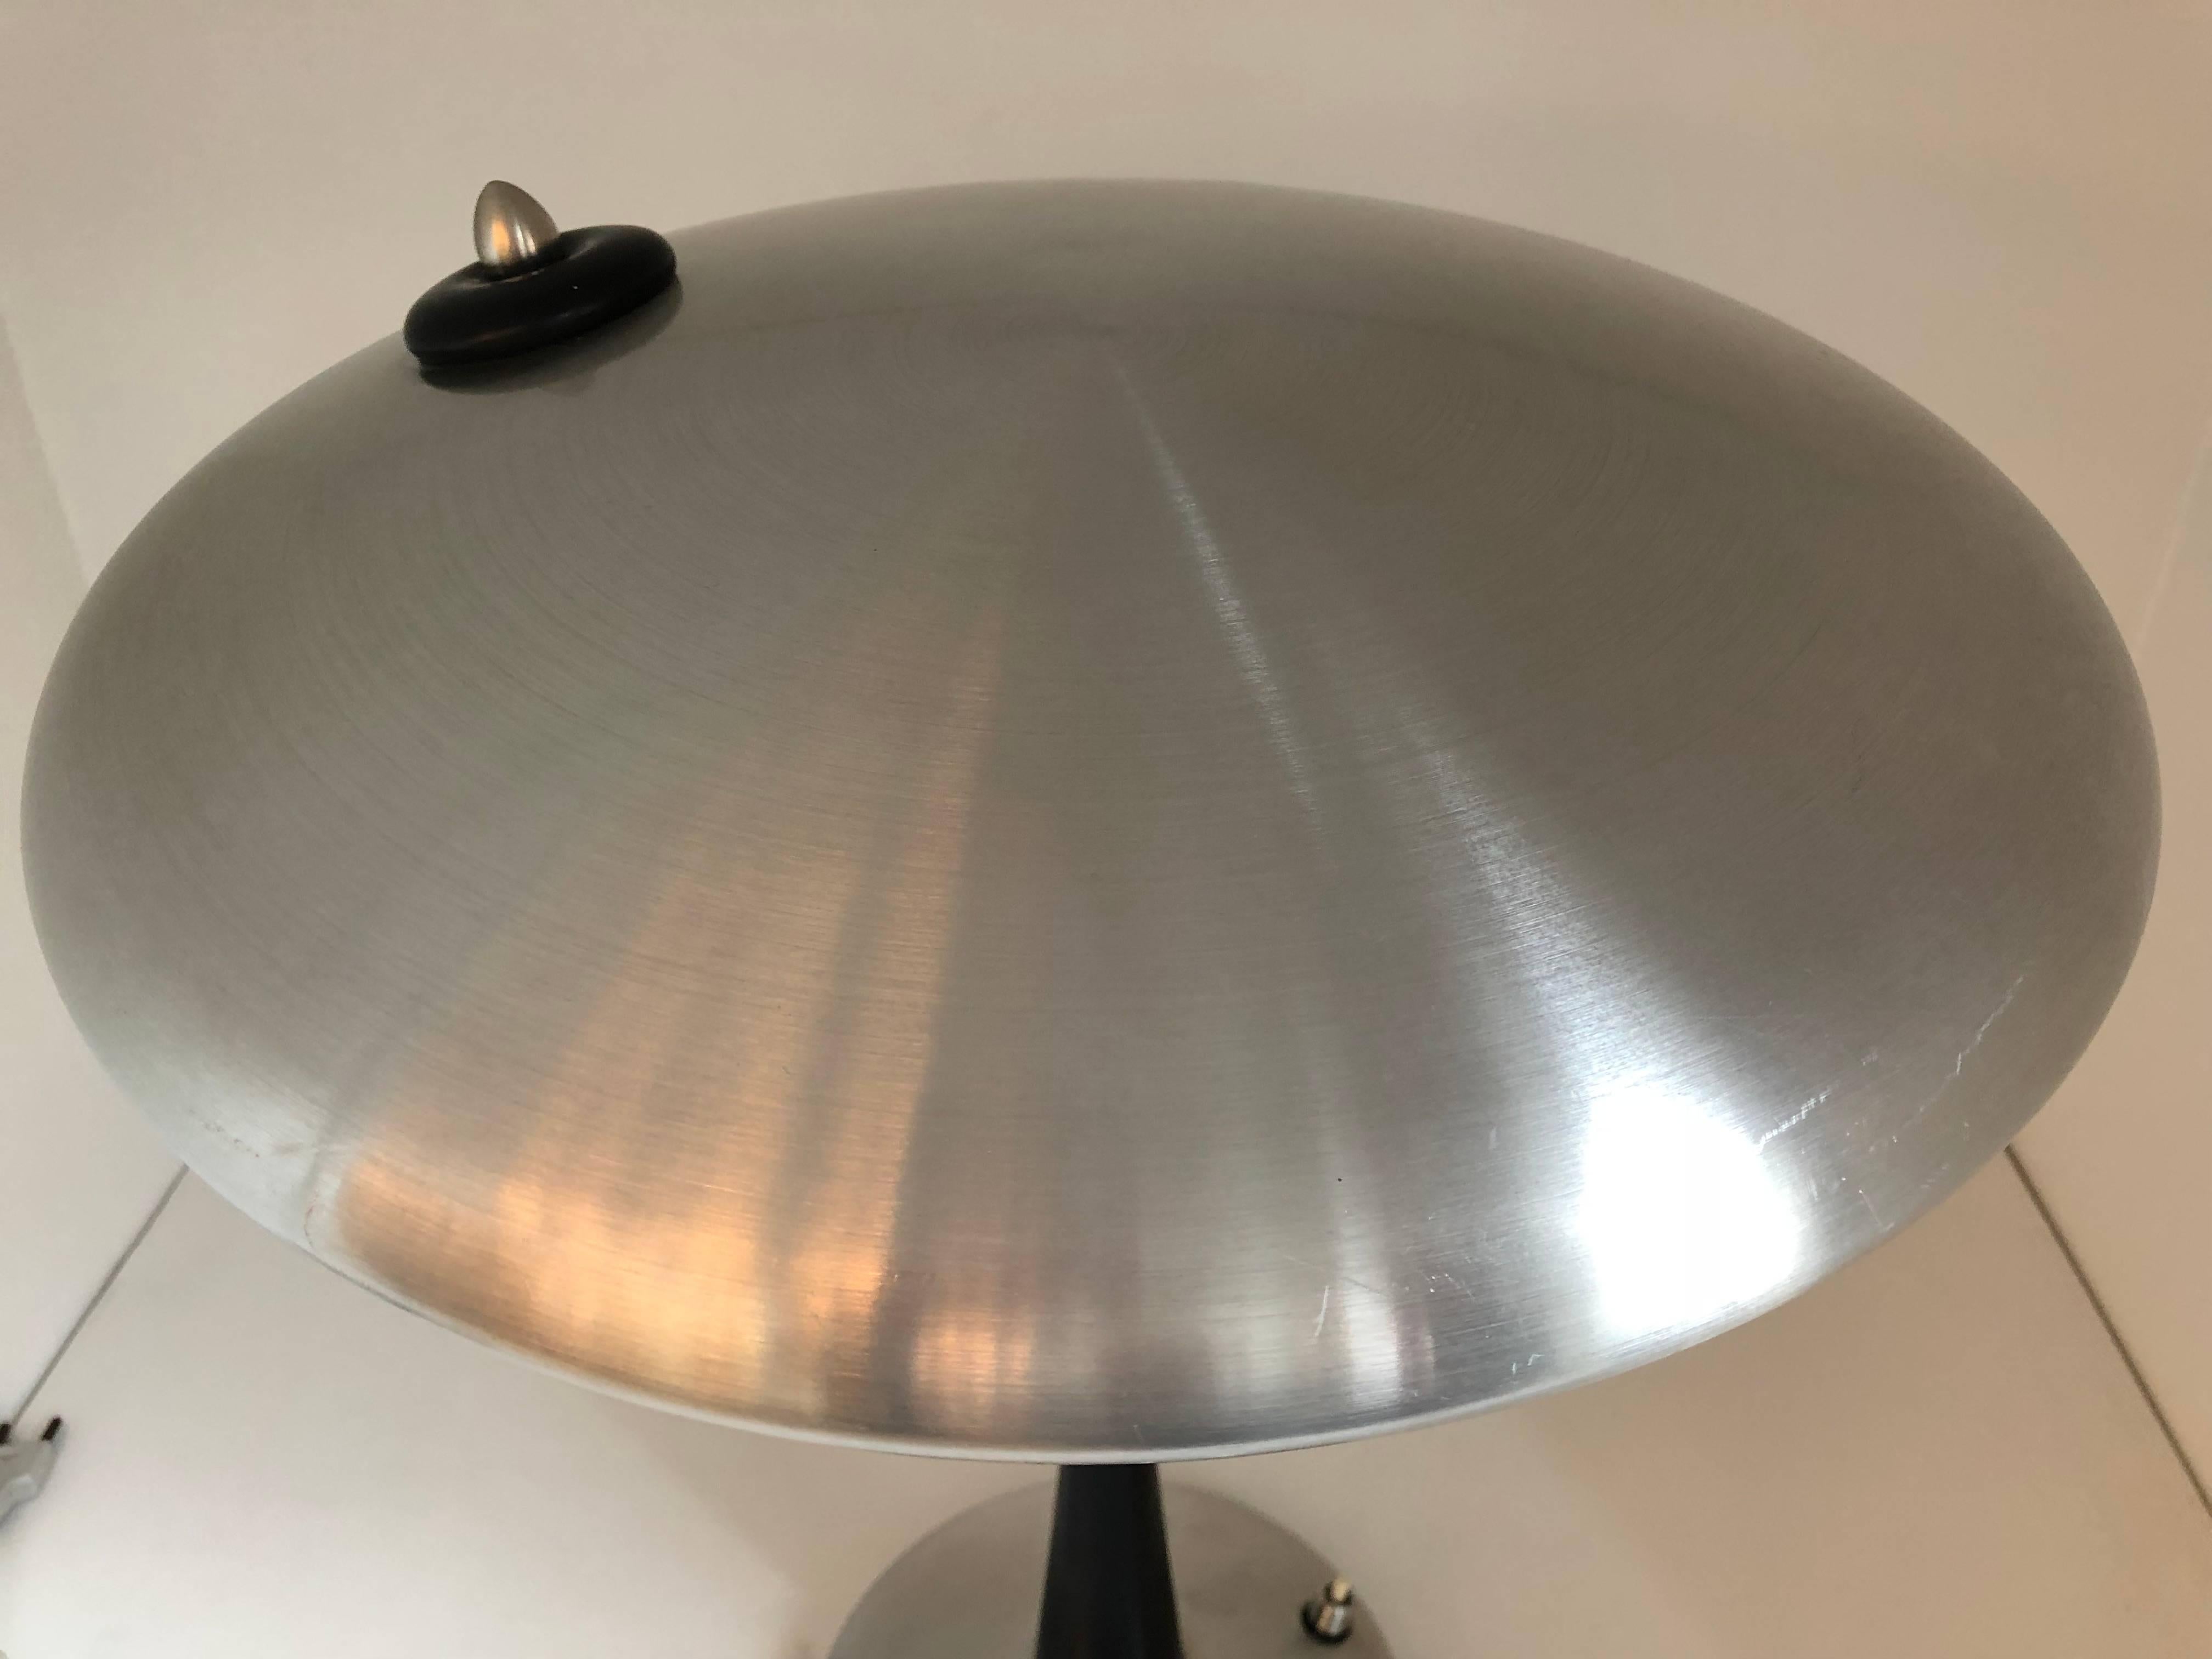 Italian task lamp designed by Oscar Torlasco for Lumi in the 1960's.  This distinguished lamp has a 
stainless steel base, black cone shaped stem and stainless steel adjustable round shade.  